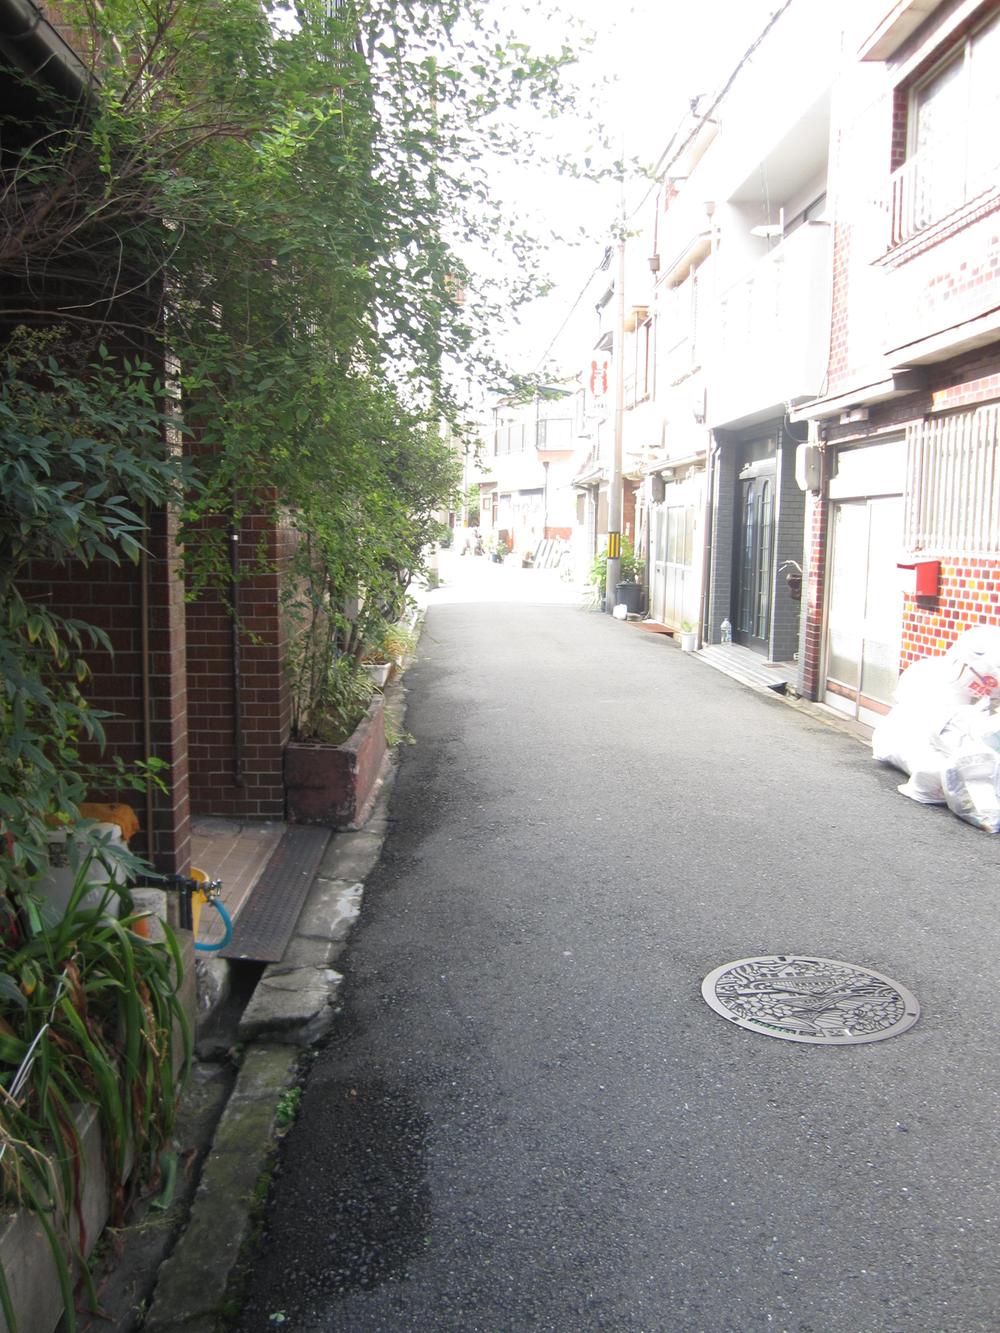 Local photos, including front road. It is a good location of the "shin-fukae station" 7 minutes walk.